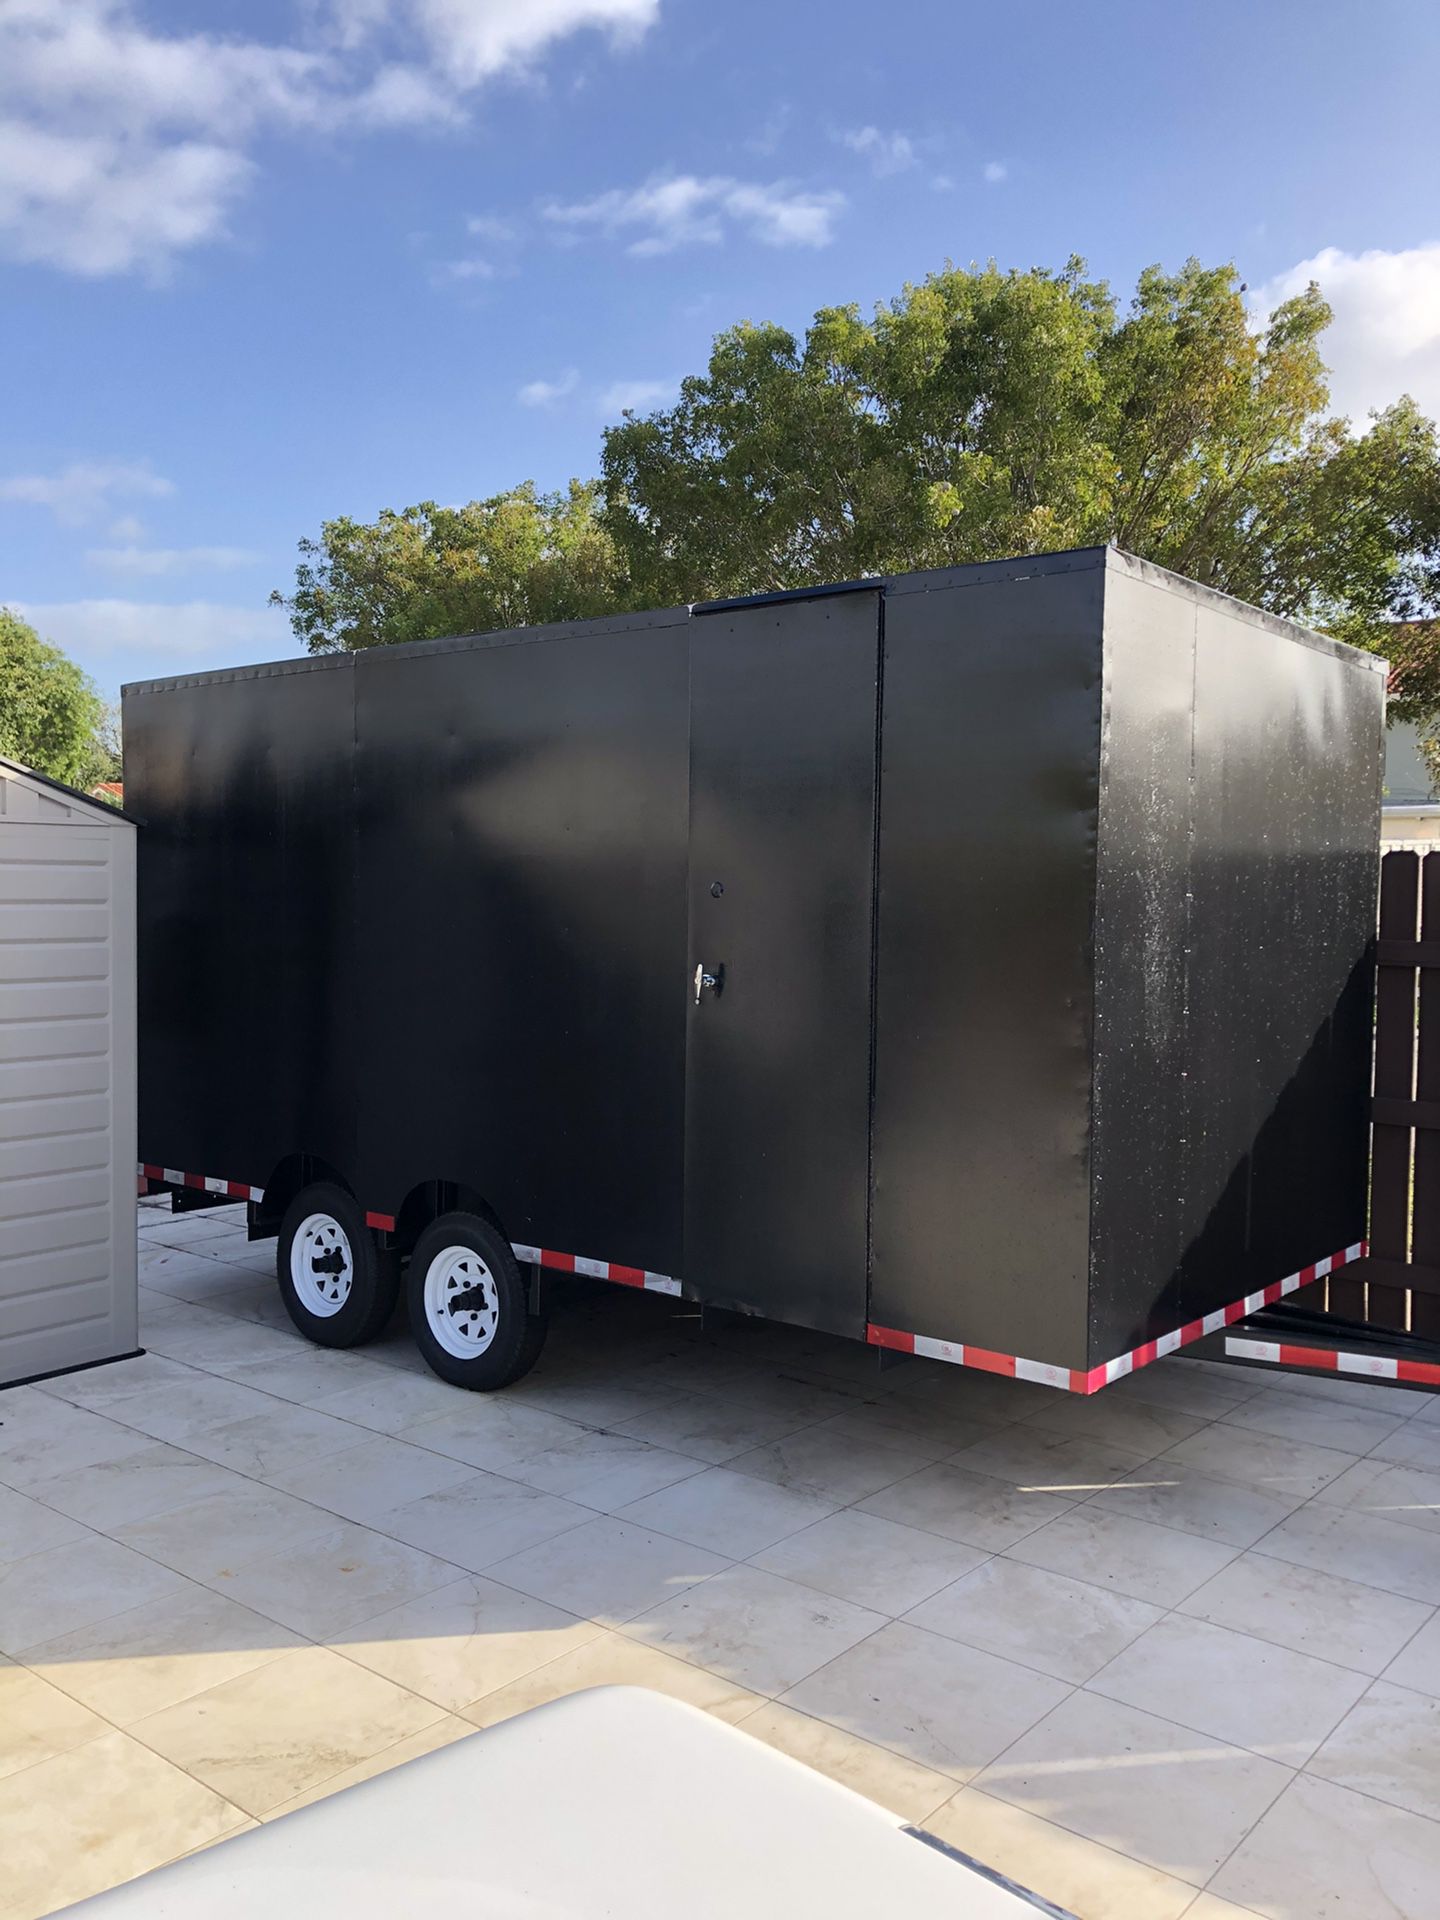 STORAGE TOOLS TRAILER 7x14 enclosed trailee